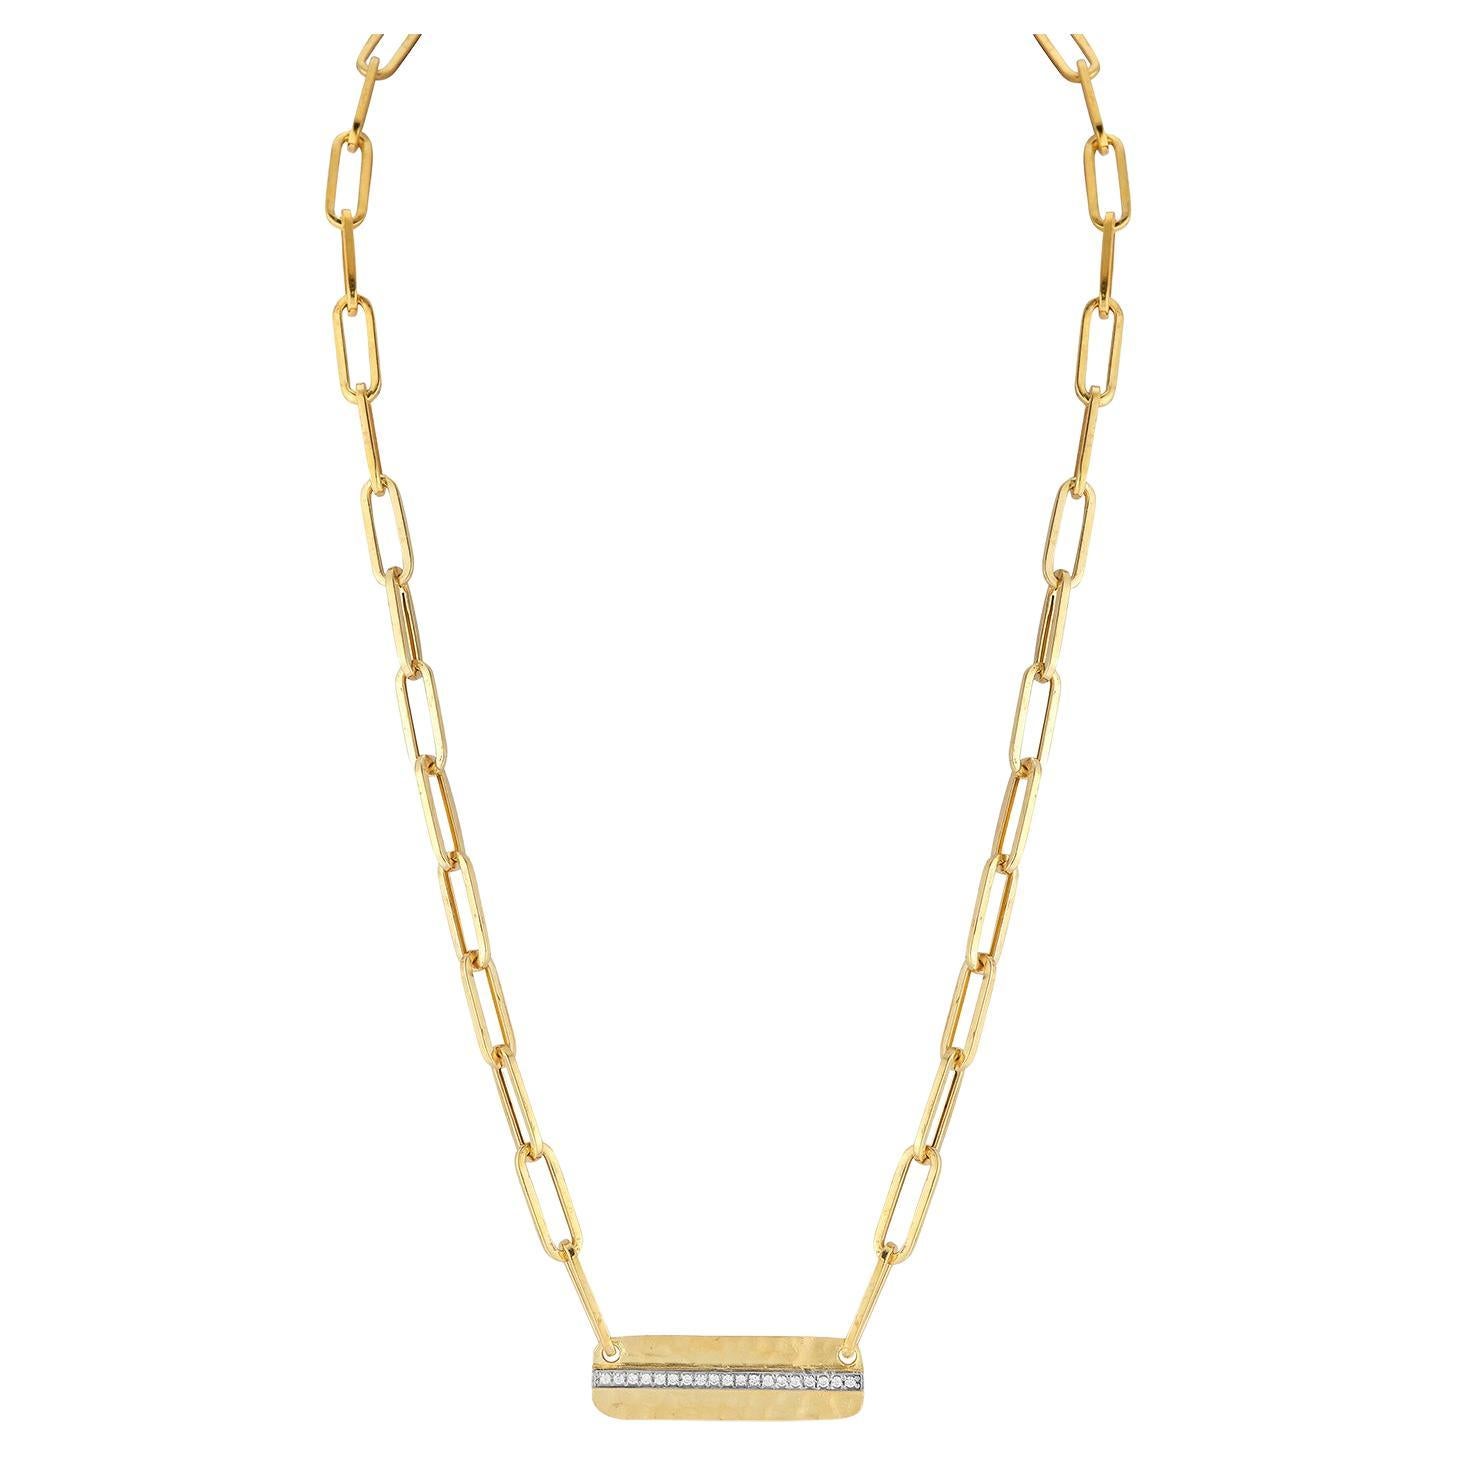 Hand-Crafted 14K Yellow Gold Open Link Dog Tag Necklace